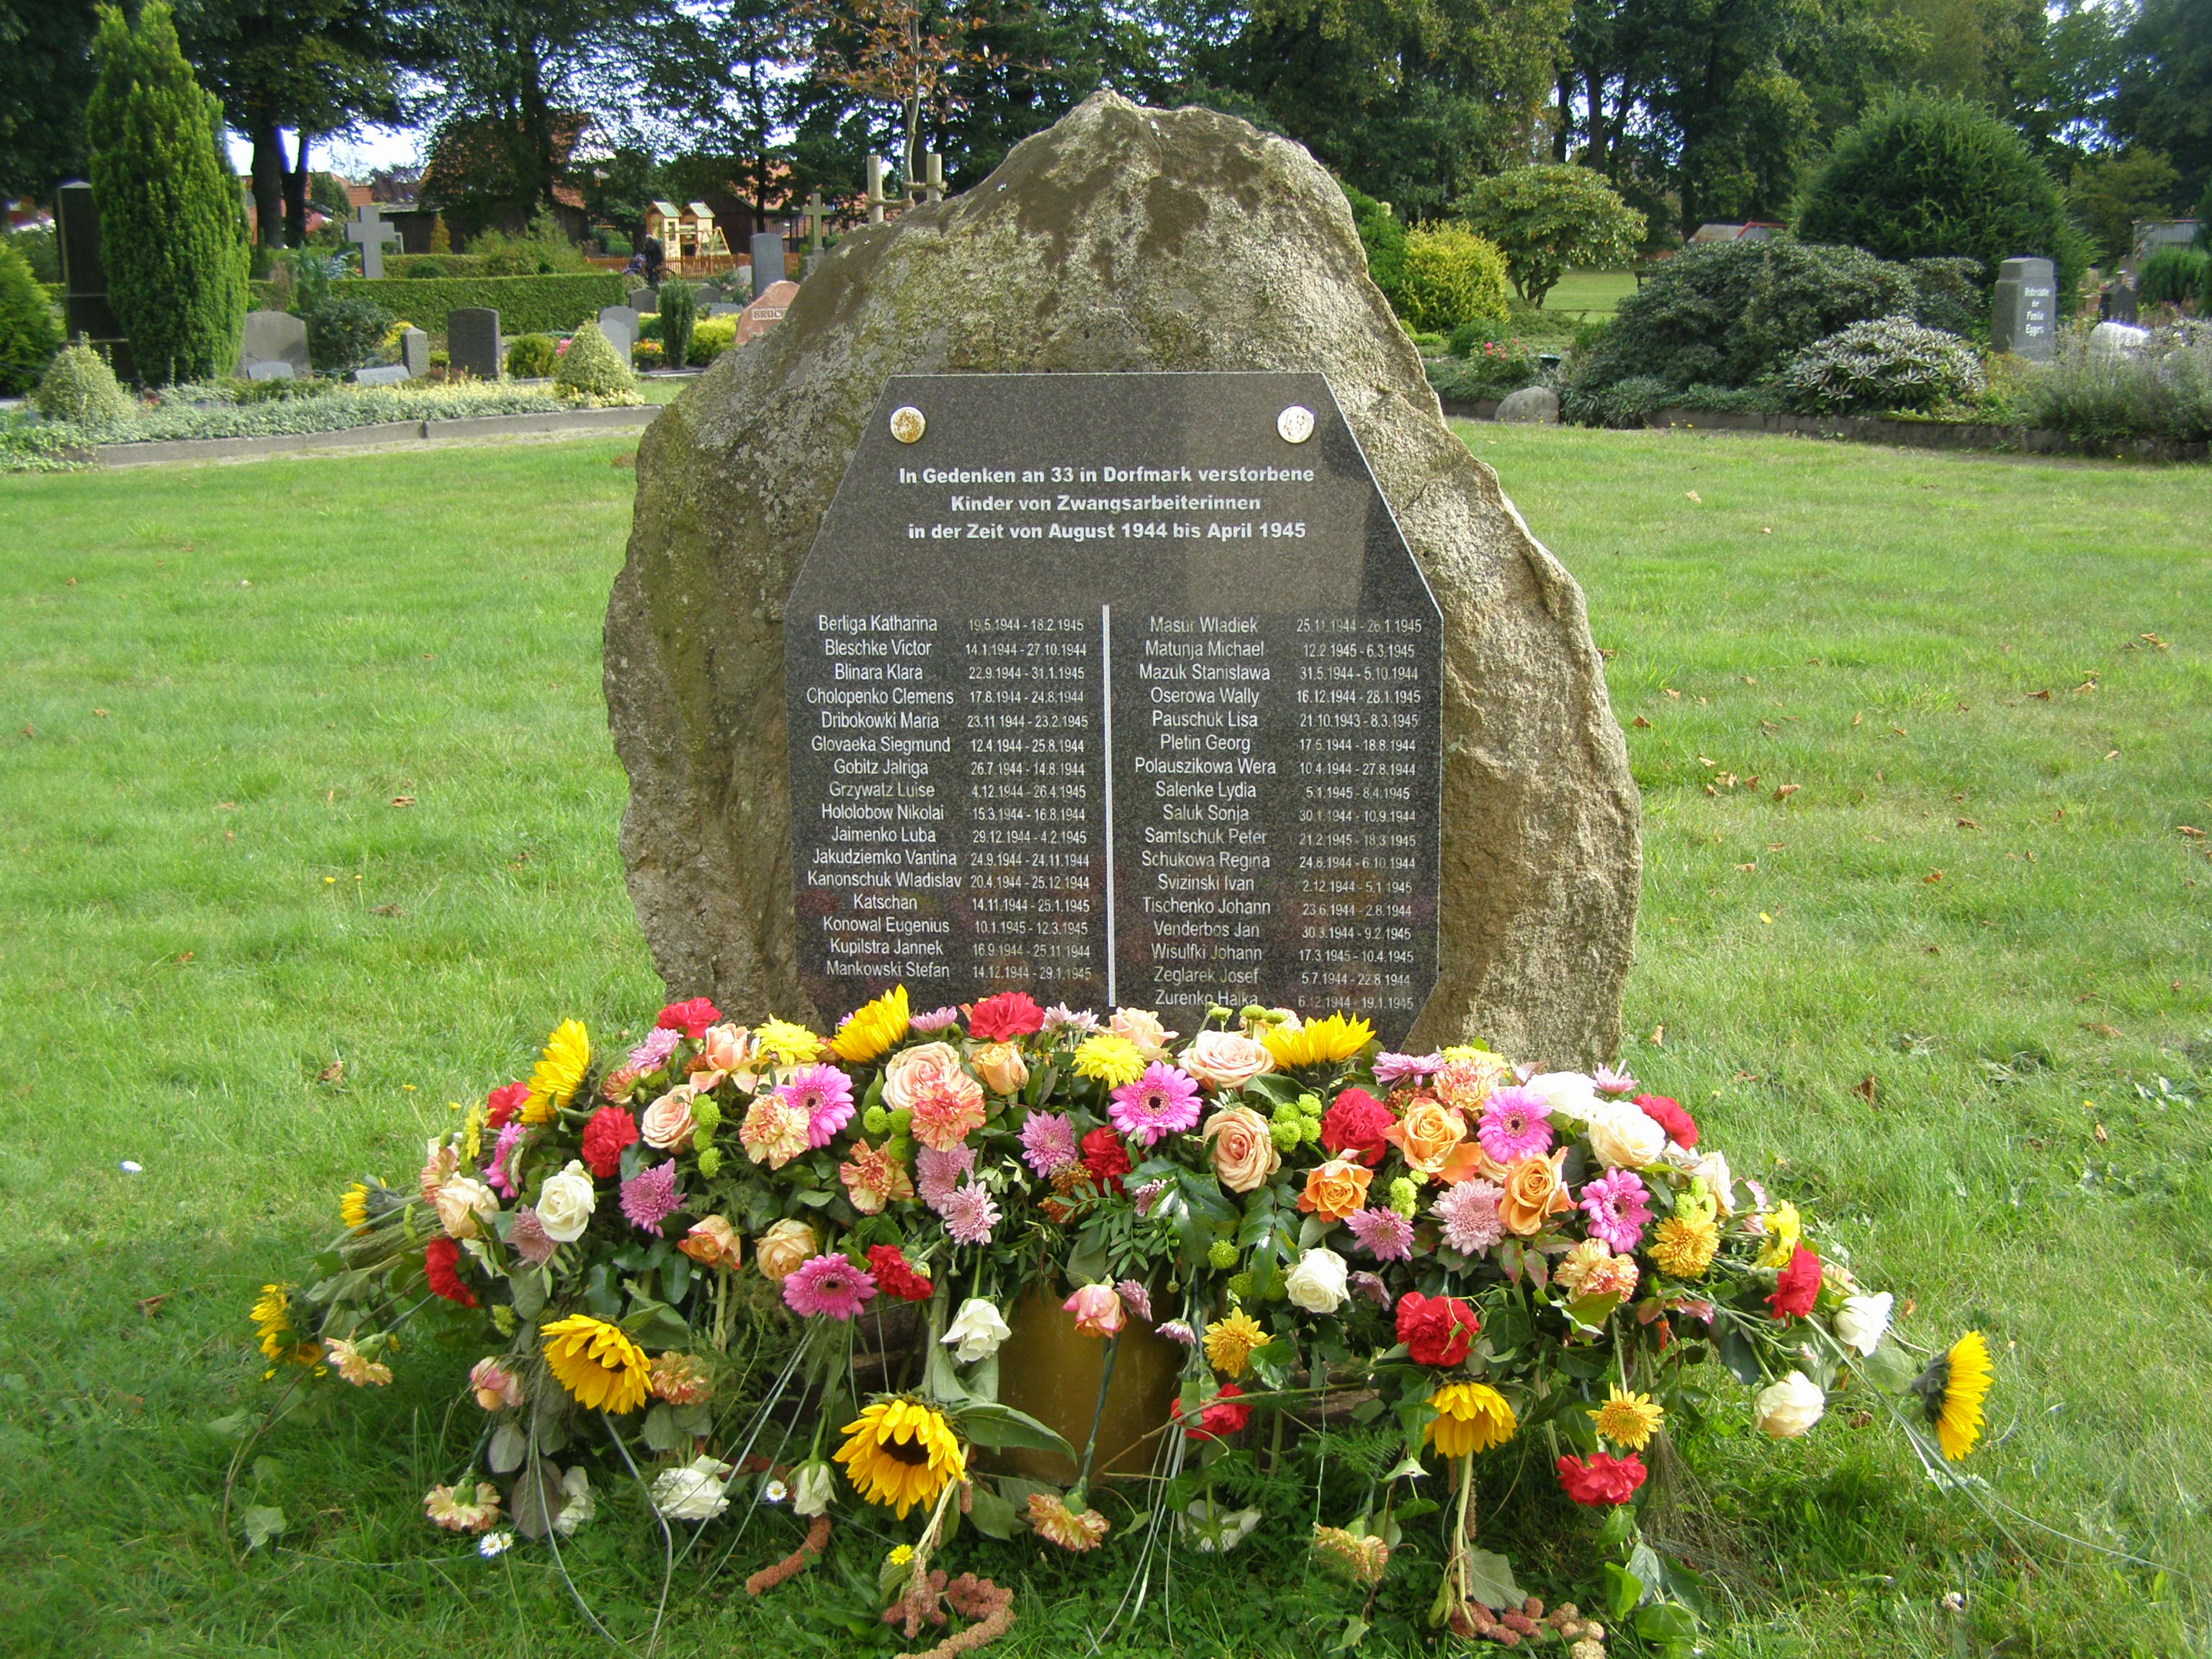 Memorial stone with the children’s names